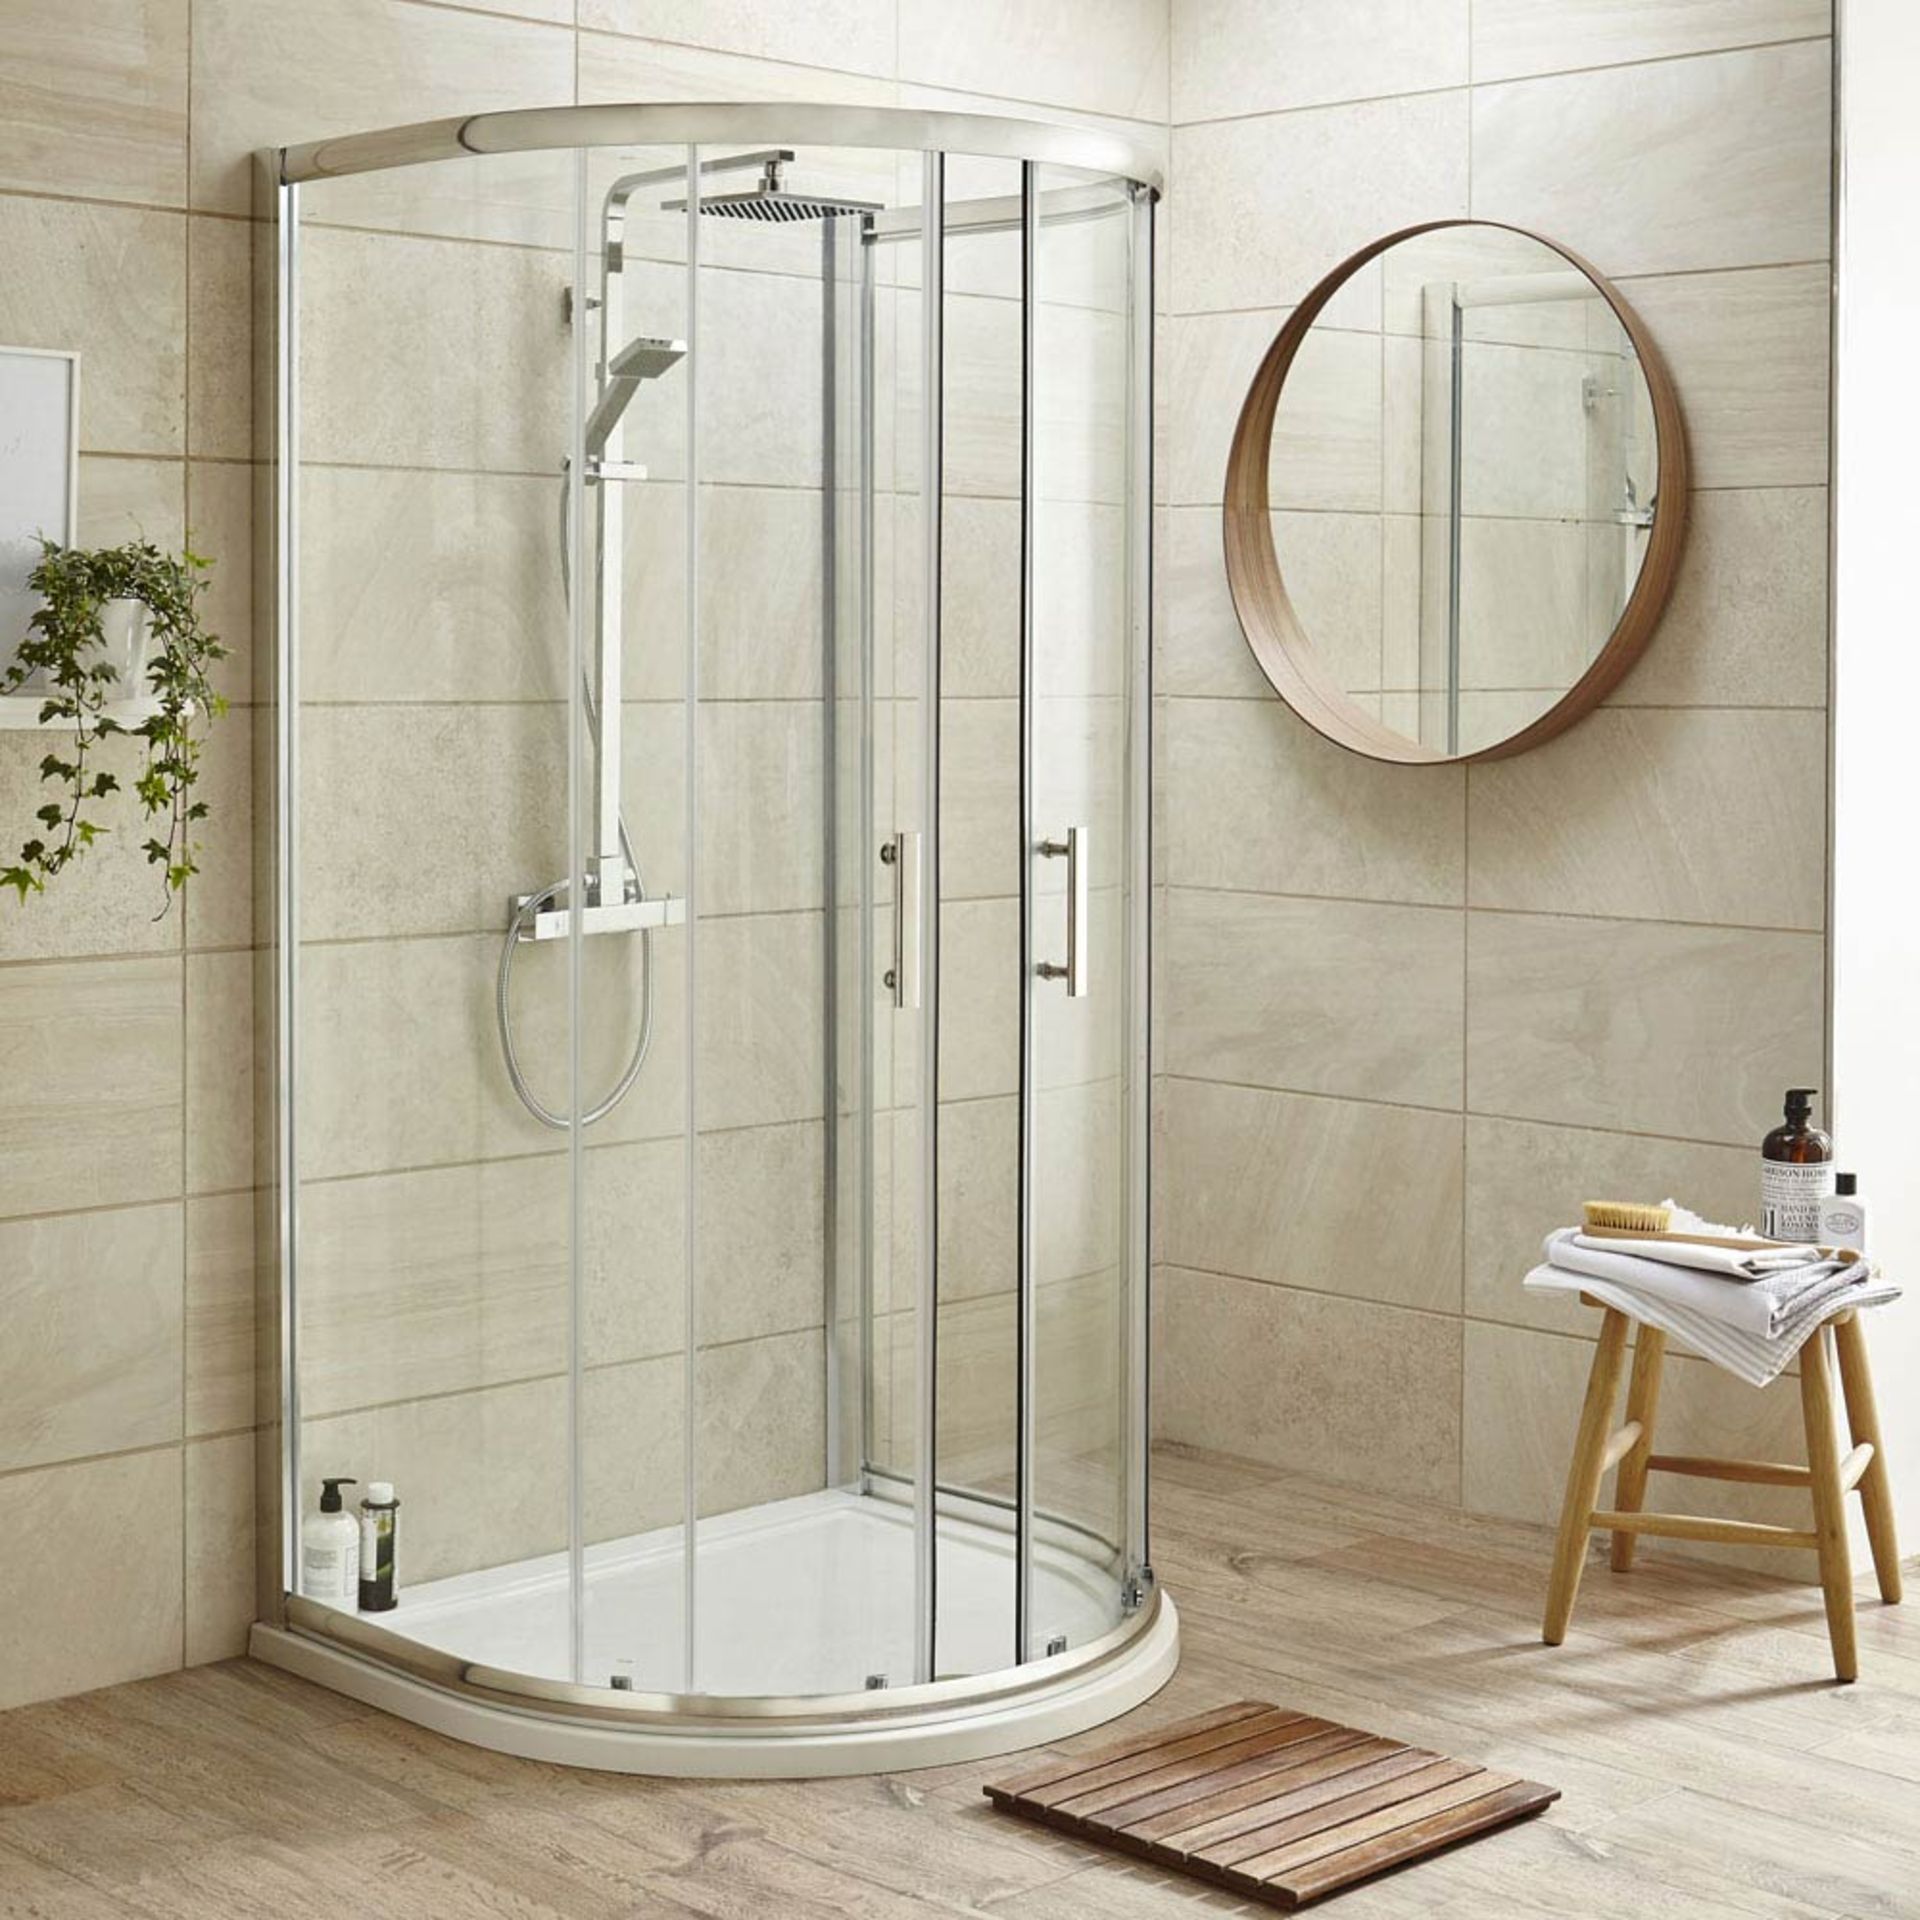 Brand New (PC129) Twyfords 770mm Hydro D Shape White Shower tray. Low profile ultra slim design Gel - Image 3 of 3